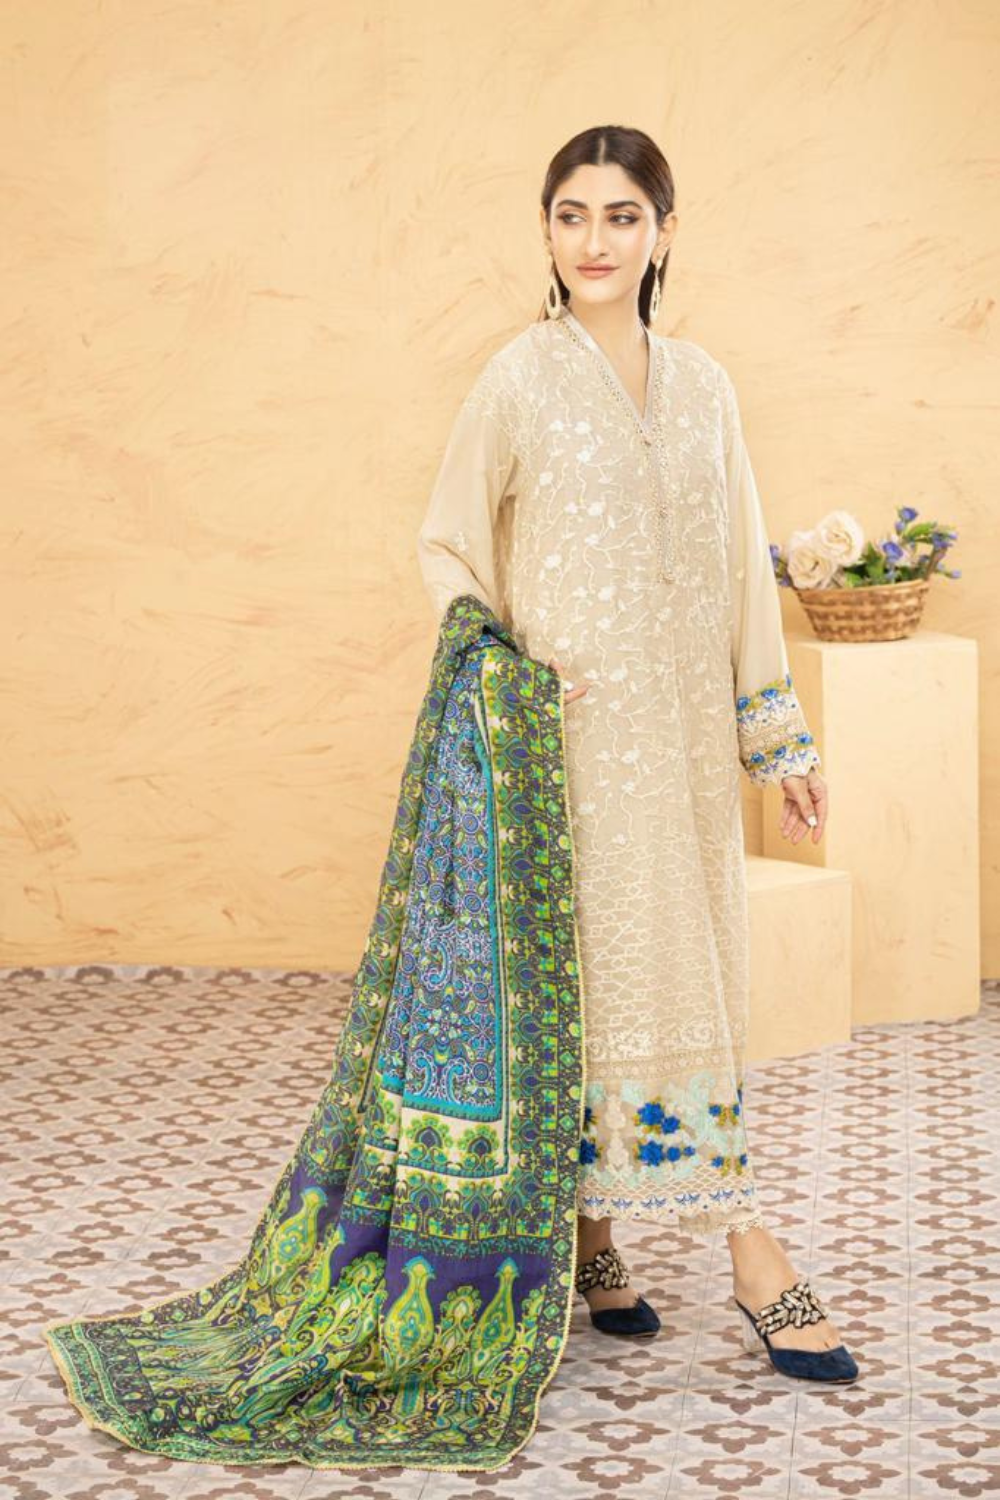 The delicate and textured taankas intricately weave folk tribal